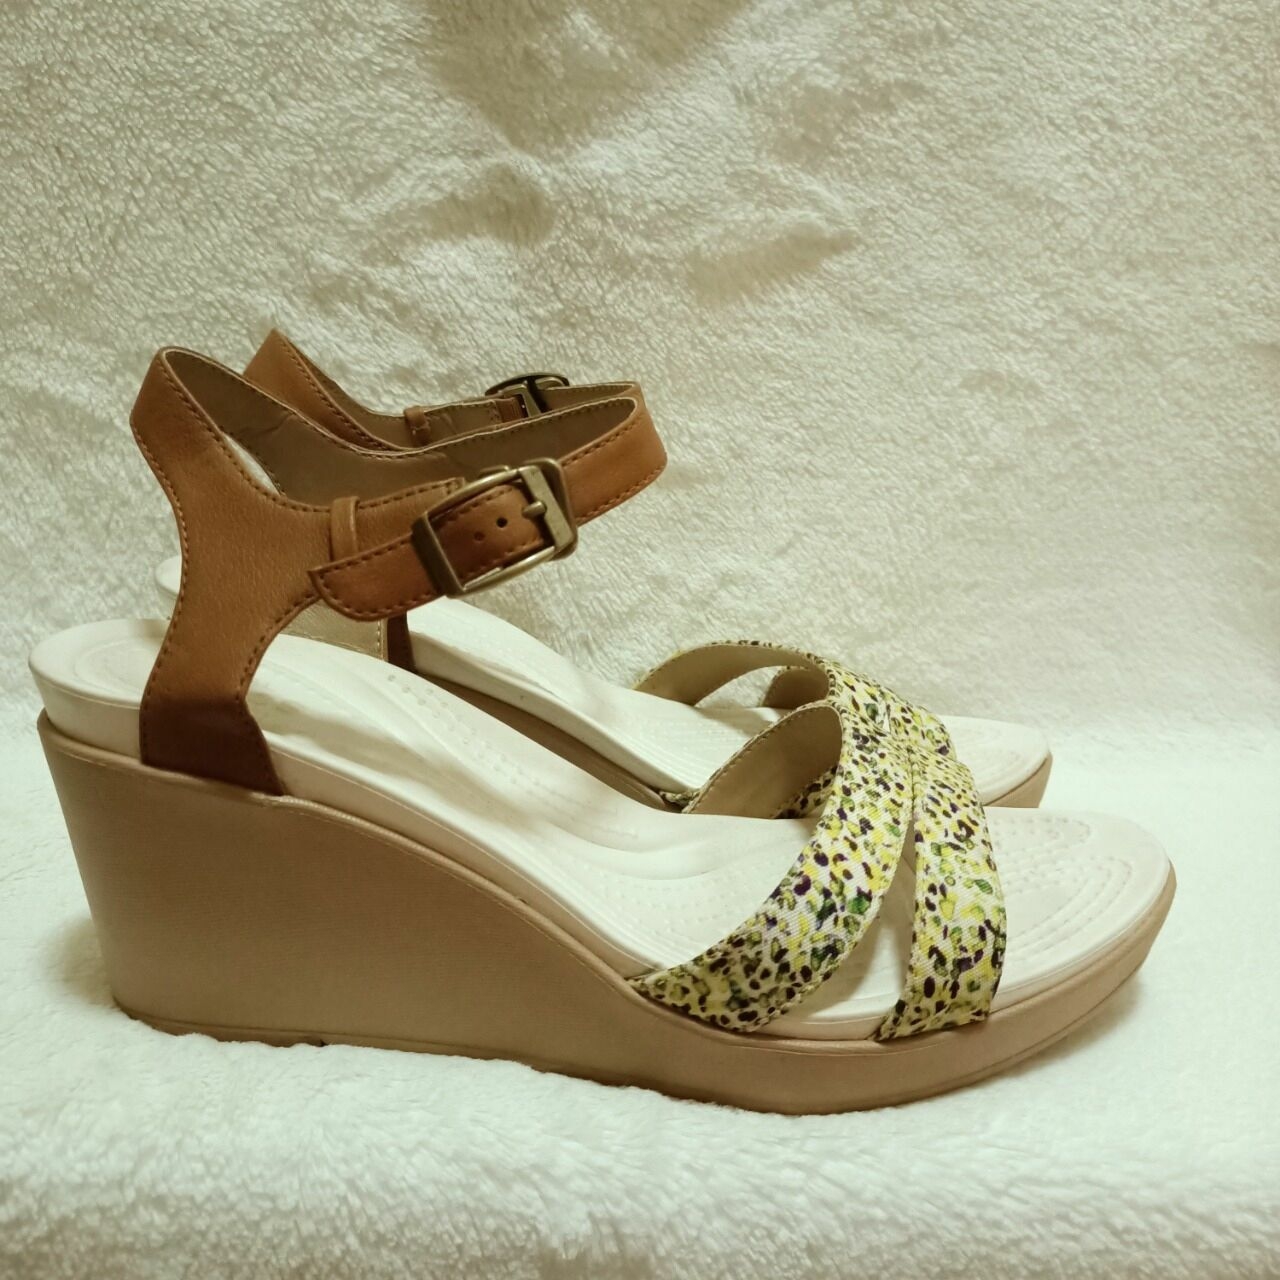 Crocs Leigh Ankle Strap Wedges